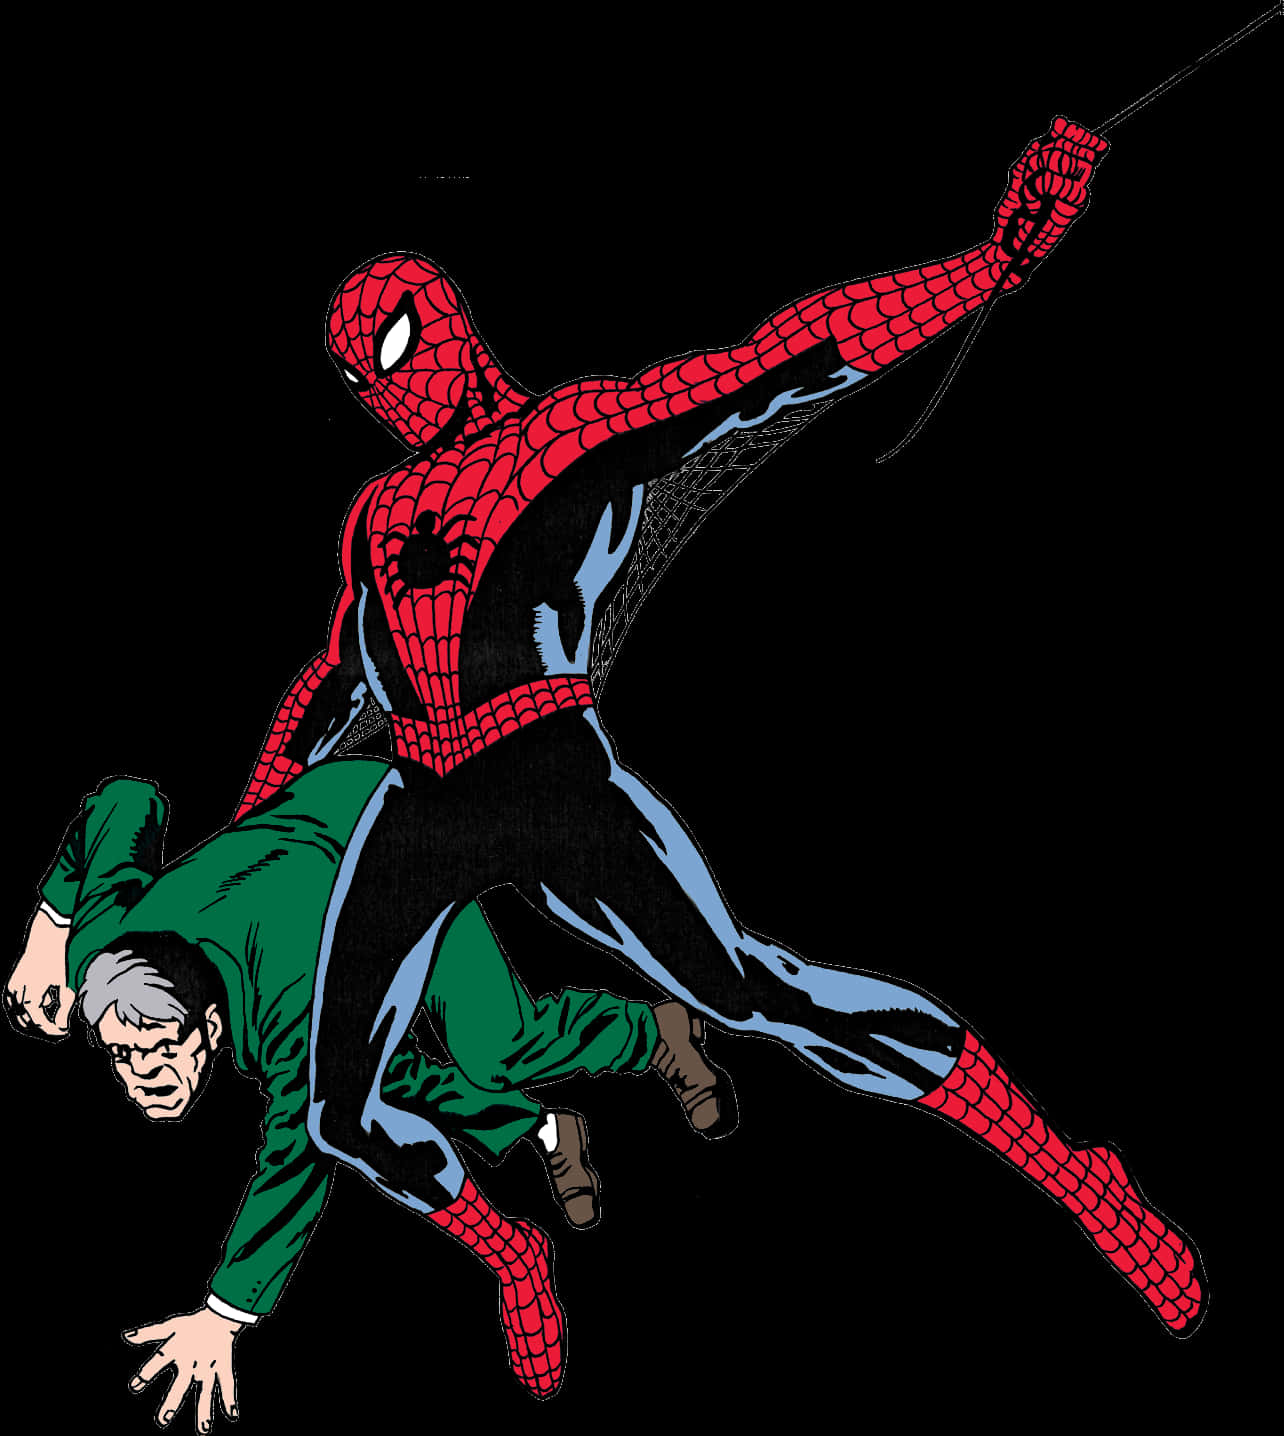 Spiderman Swinging Action Clipart PNG image